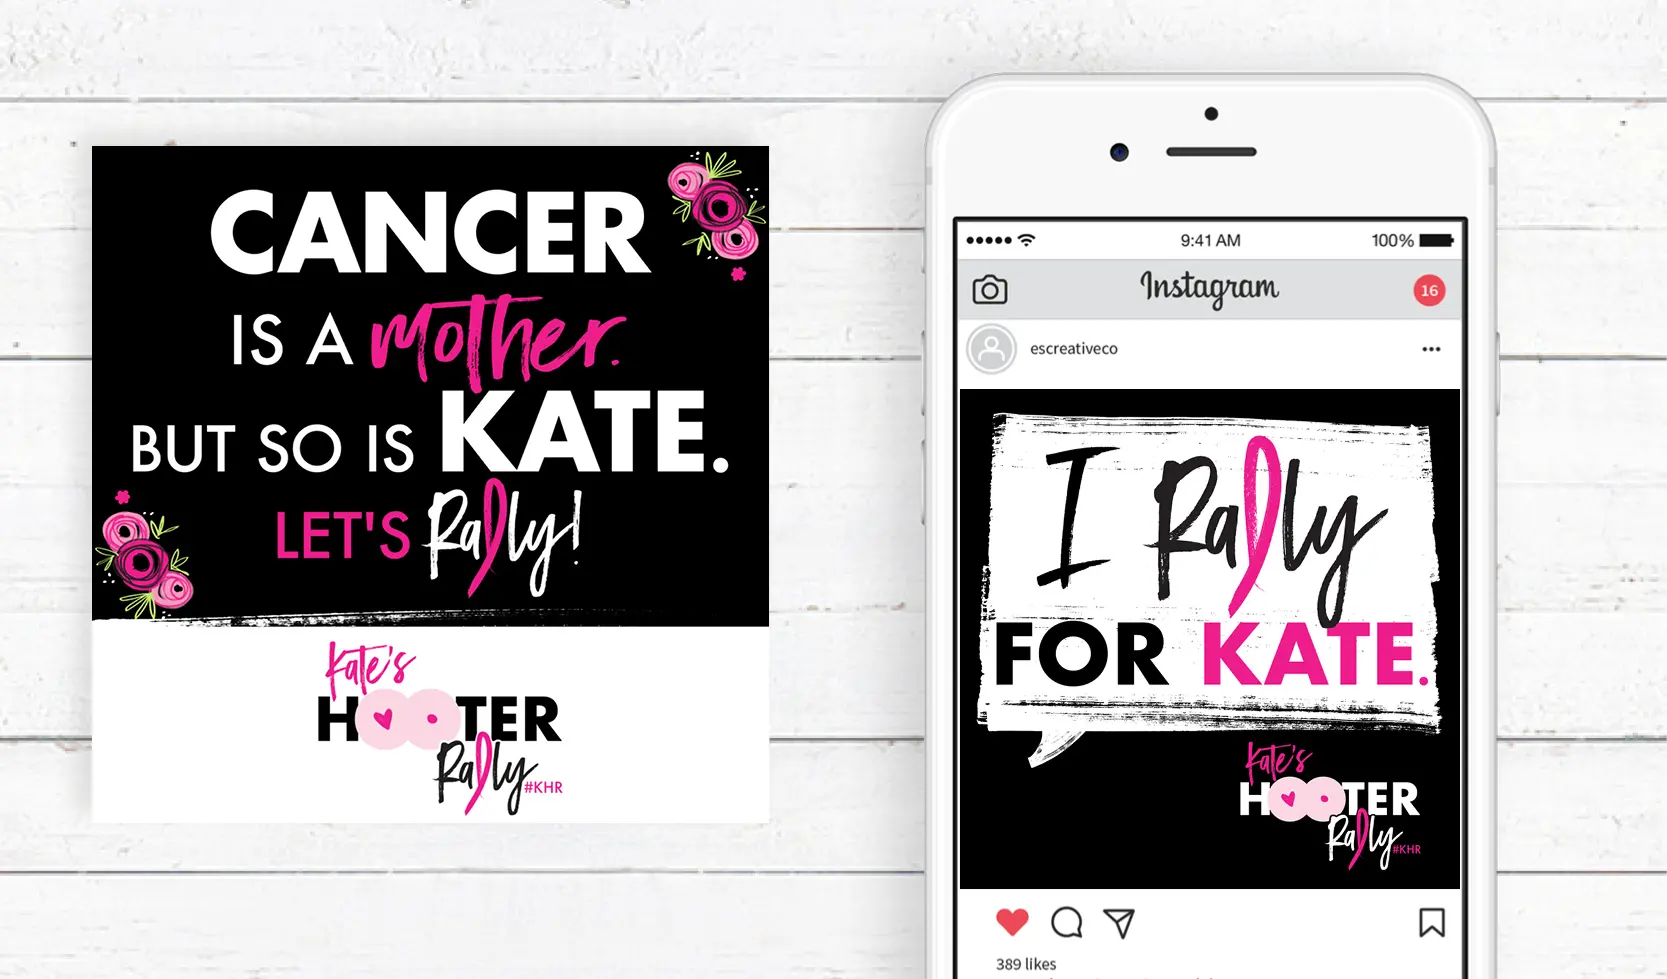 Edgy, hot pink and floral logo & branding design for Kate's Hooter Rally #KHR